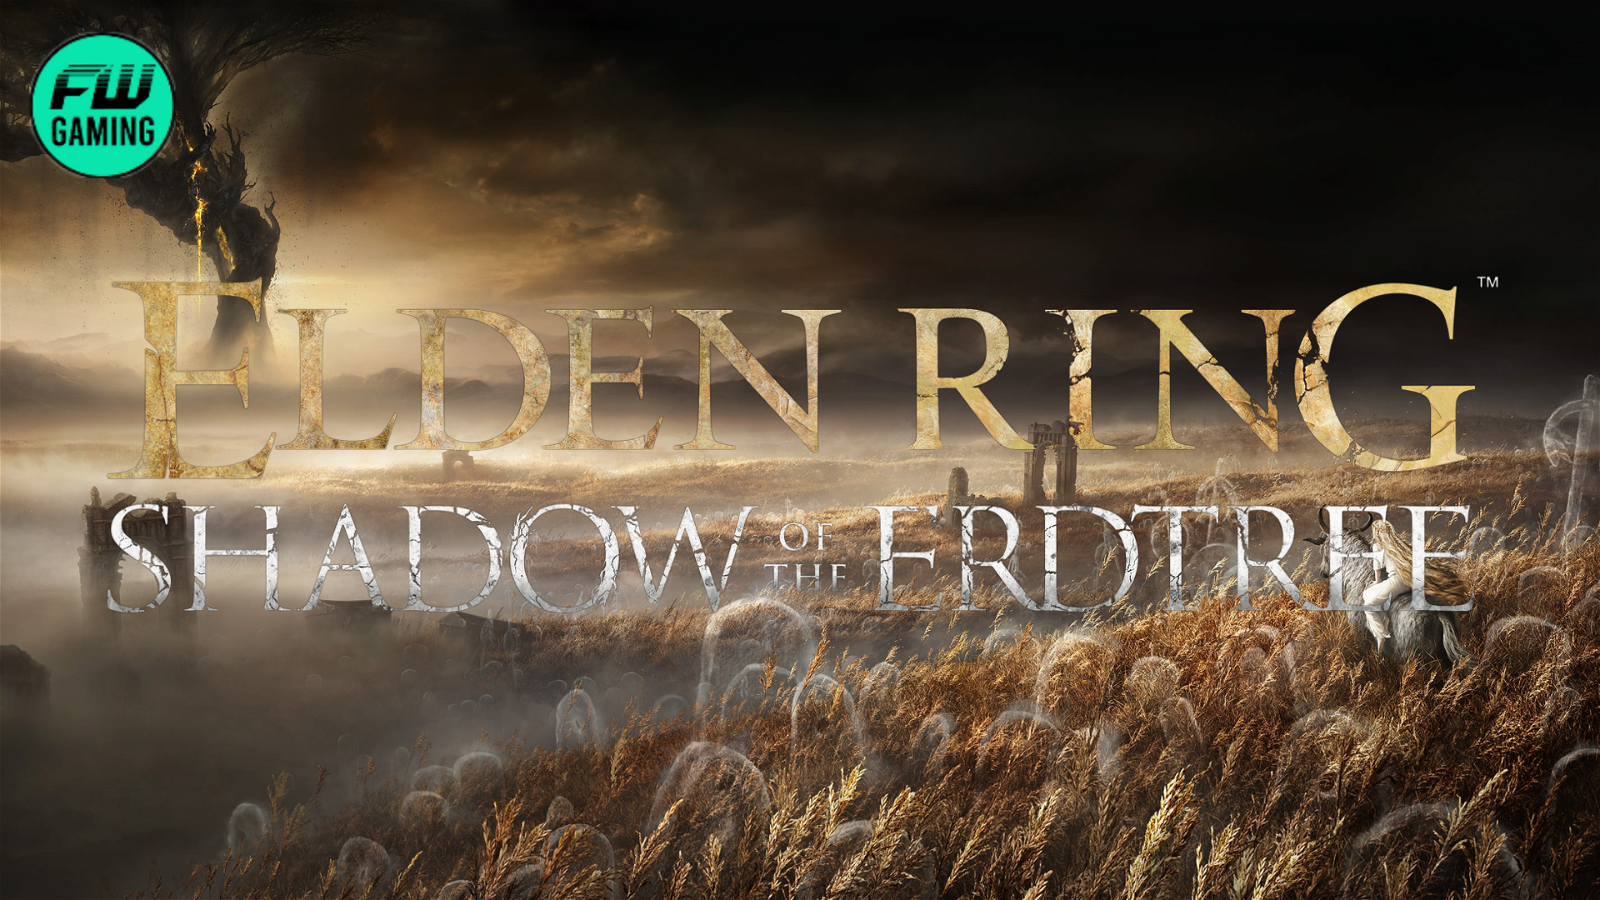 Elden Ring’s Upcoming Shadow of the Erdtree’s Single Piece of Artwork May Actually Give the Setting, Character, and Story Away